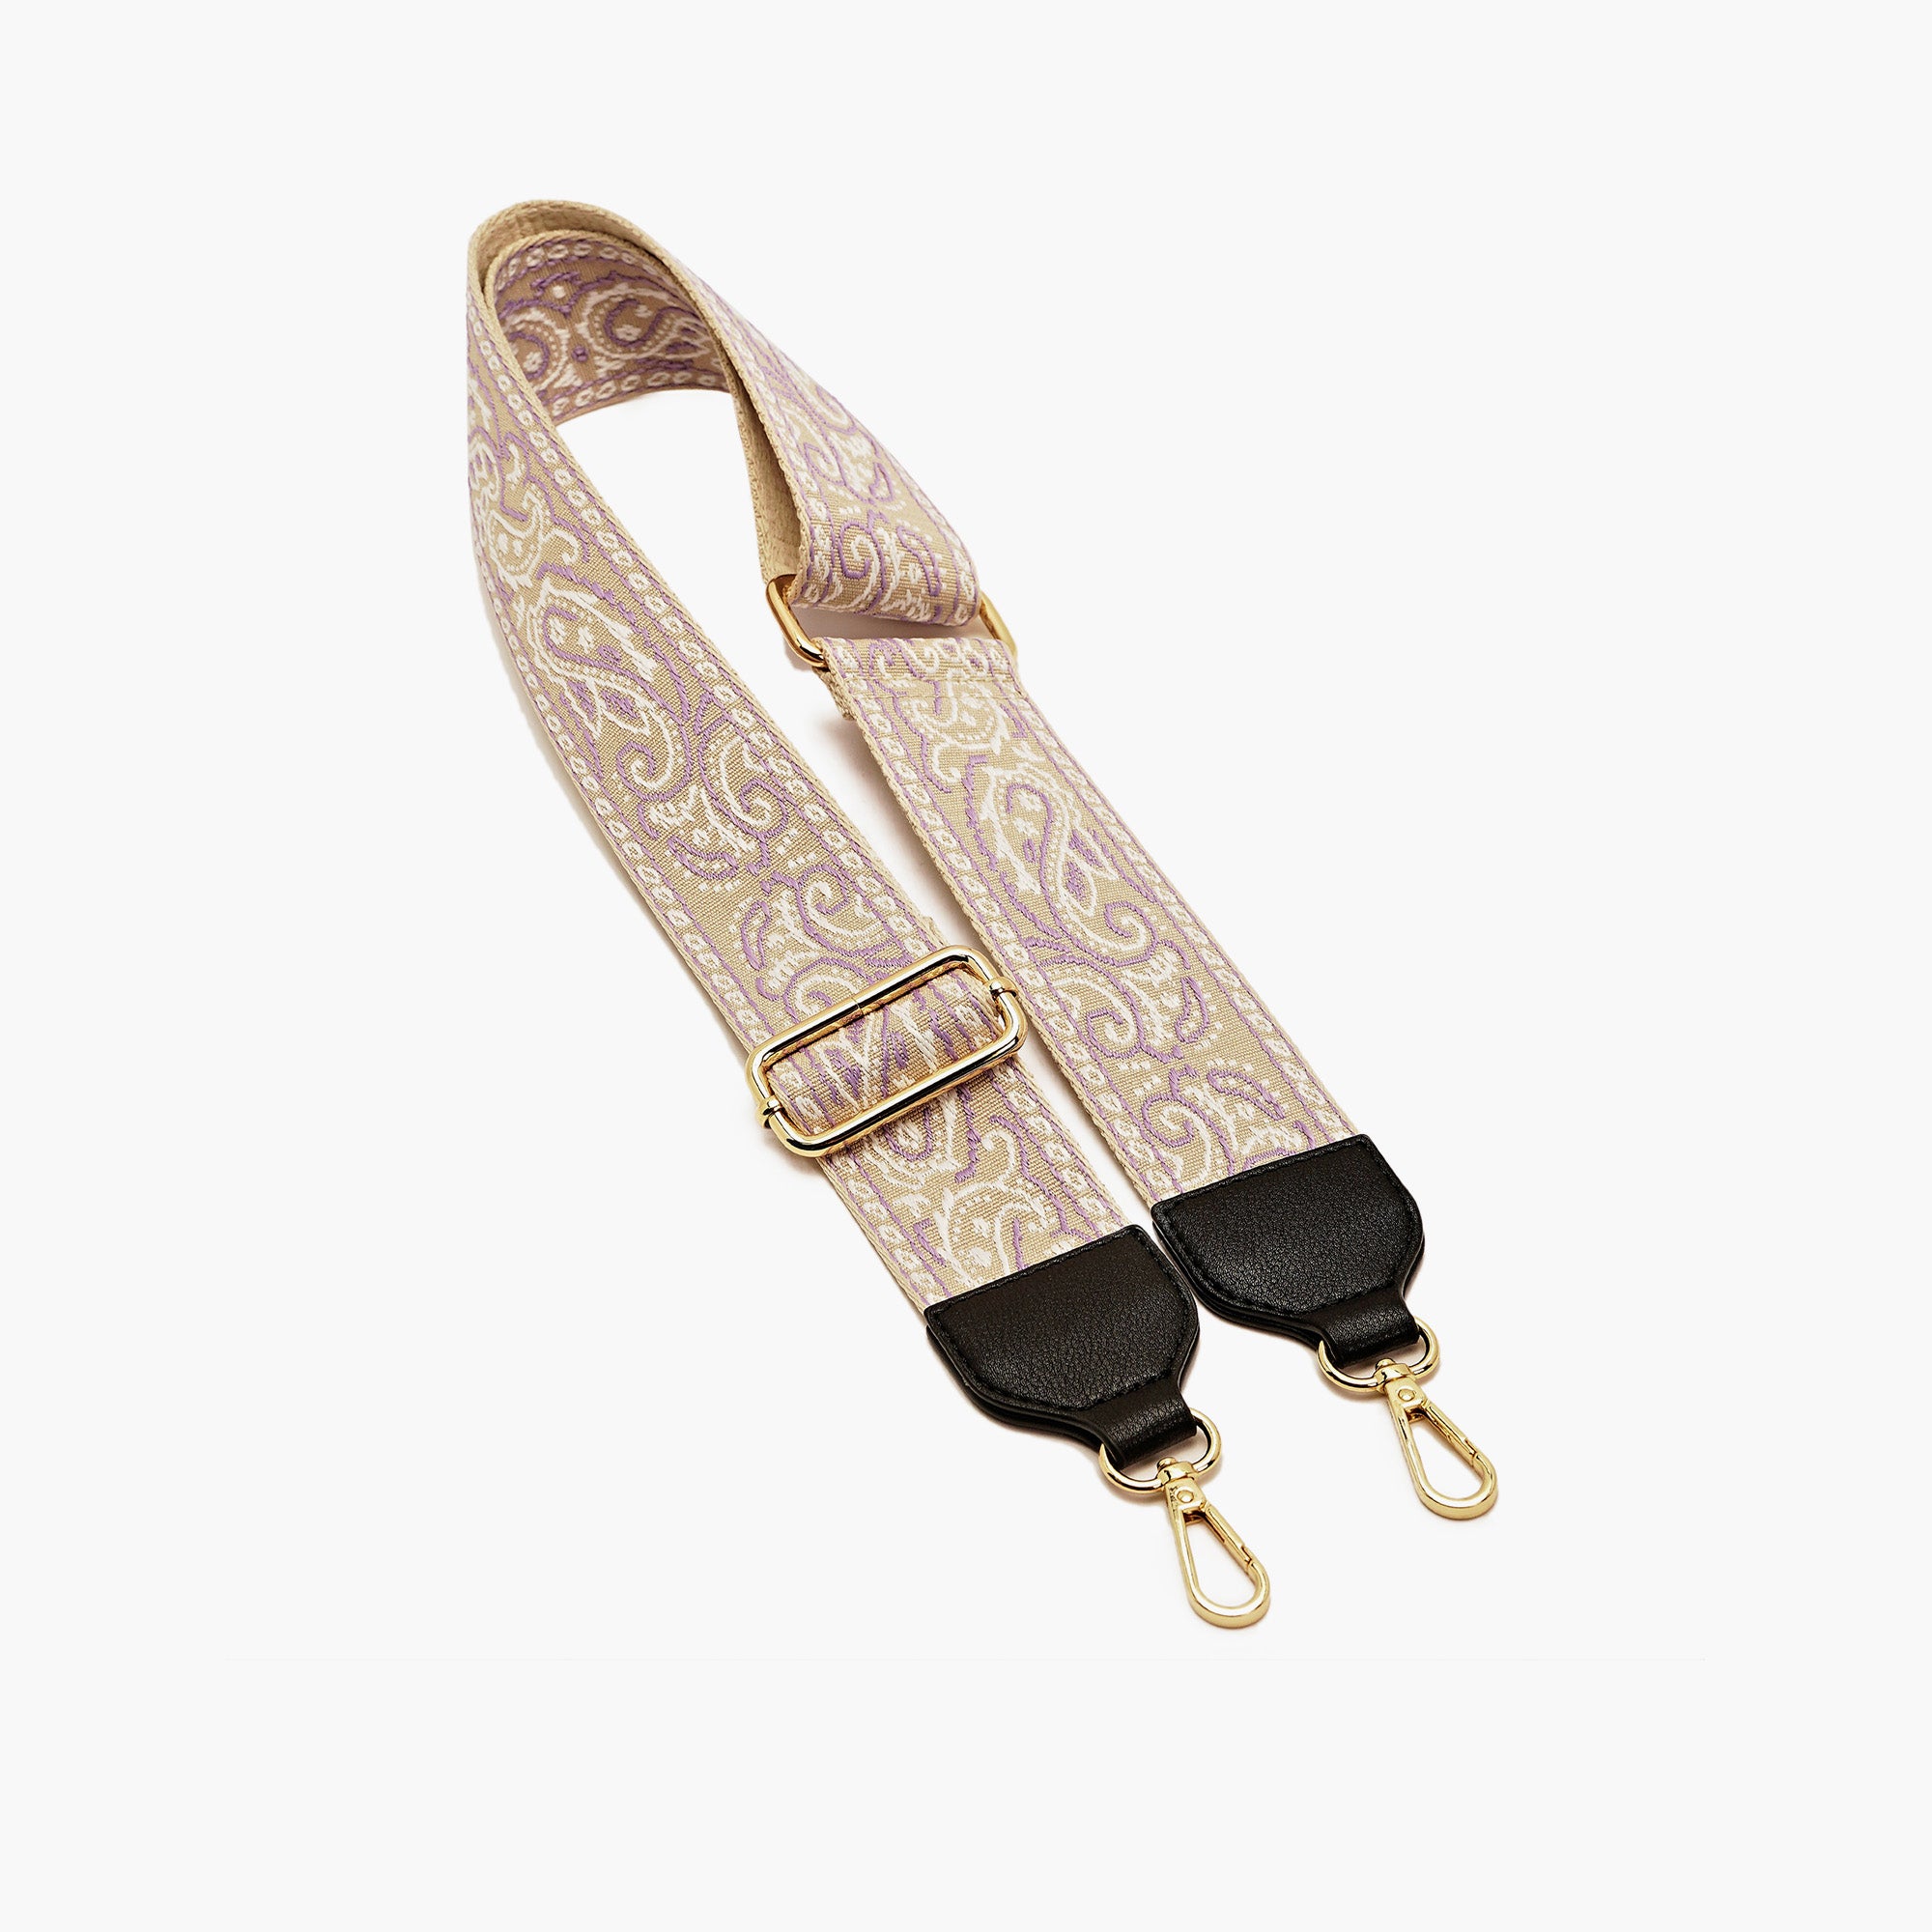 Paisley Western Inspired Adjustable Strap